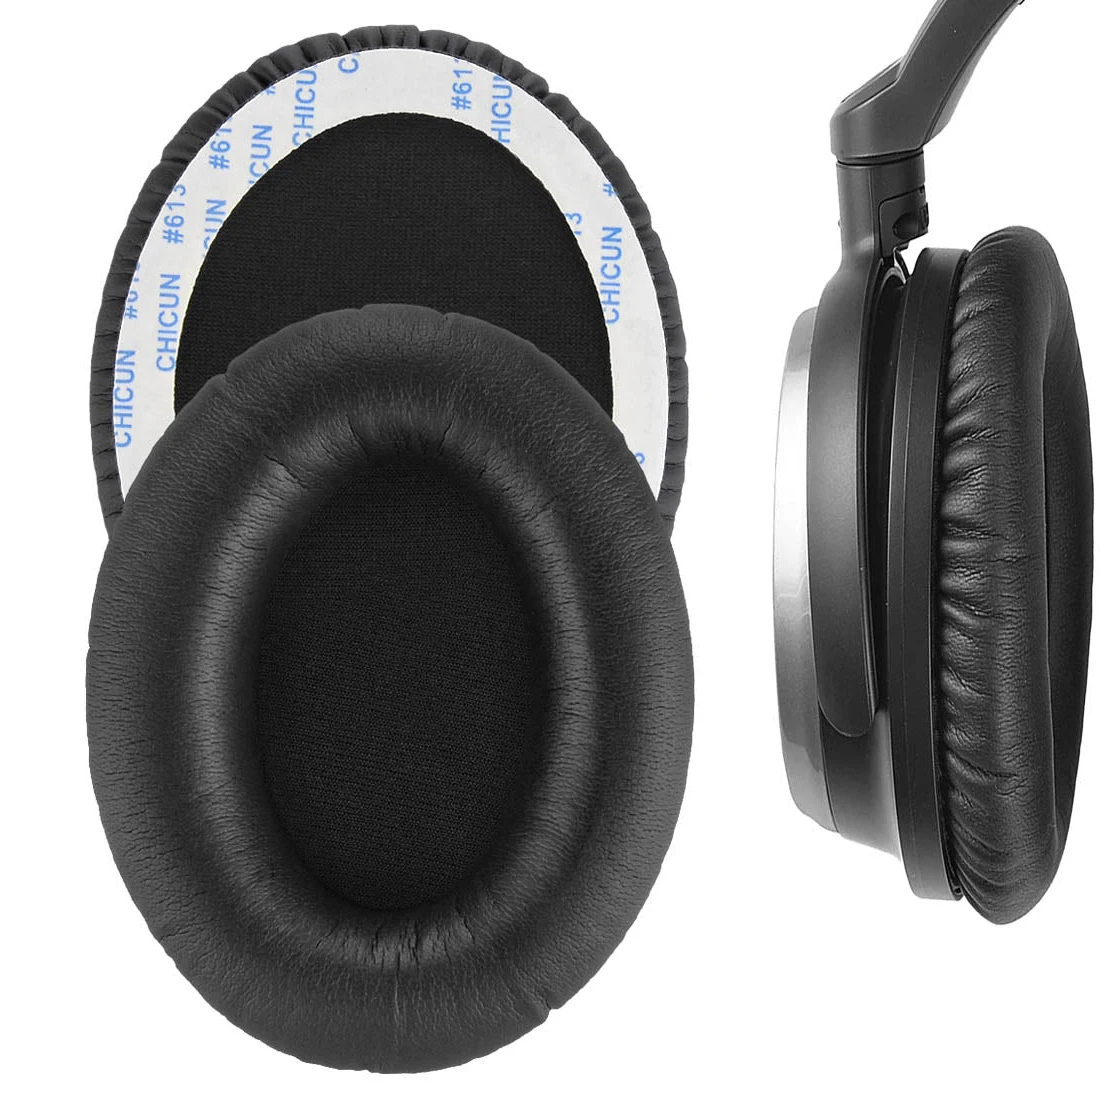 

Replacement Earpads Ear Cushion Pads For Audio-Technica ATH-ANC7 ATH-ANC7B ATH-ANC9 ATH-ANC27 ATH-ANC29 ATH-ANC70 Headphones